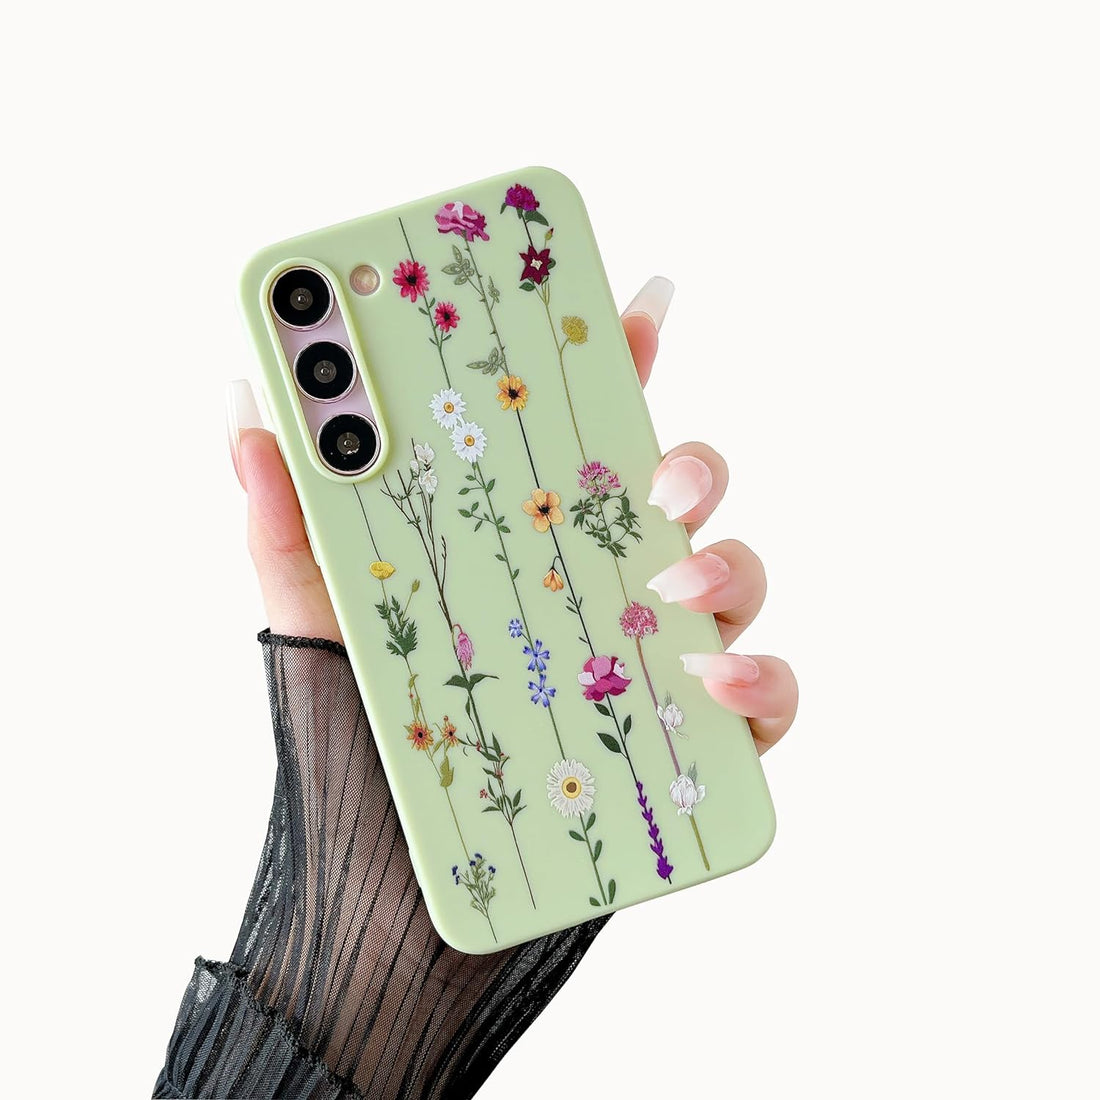 ZTOFERA Floral Case for Samsung Galaxy S23 Plus 5G,Cute Flower Pattern Case for Girls Women,Flexible Silicone Protective Slim Shockproof Bumper Phone Cover for Samsung Galaxy S23 Plus,Green